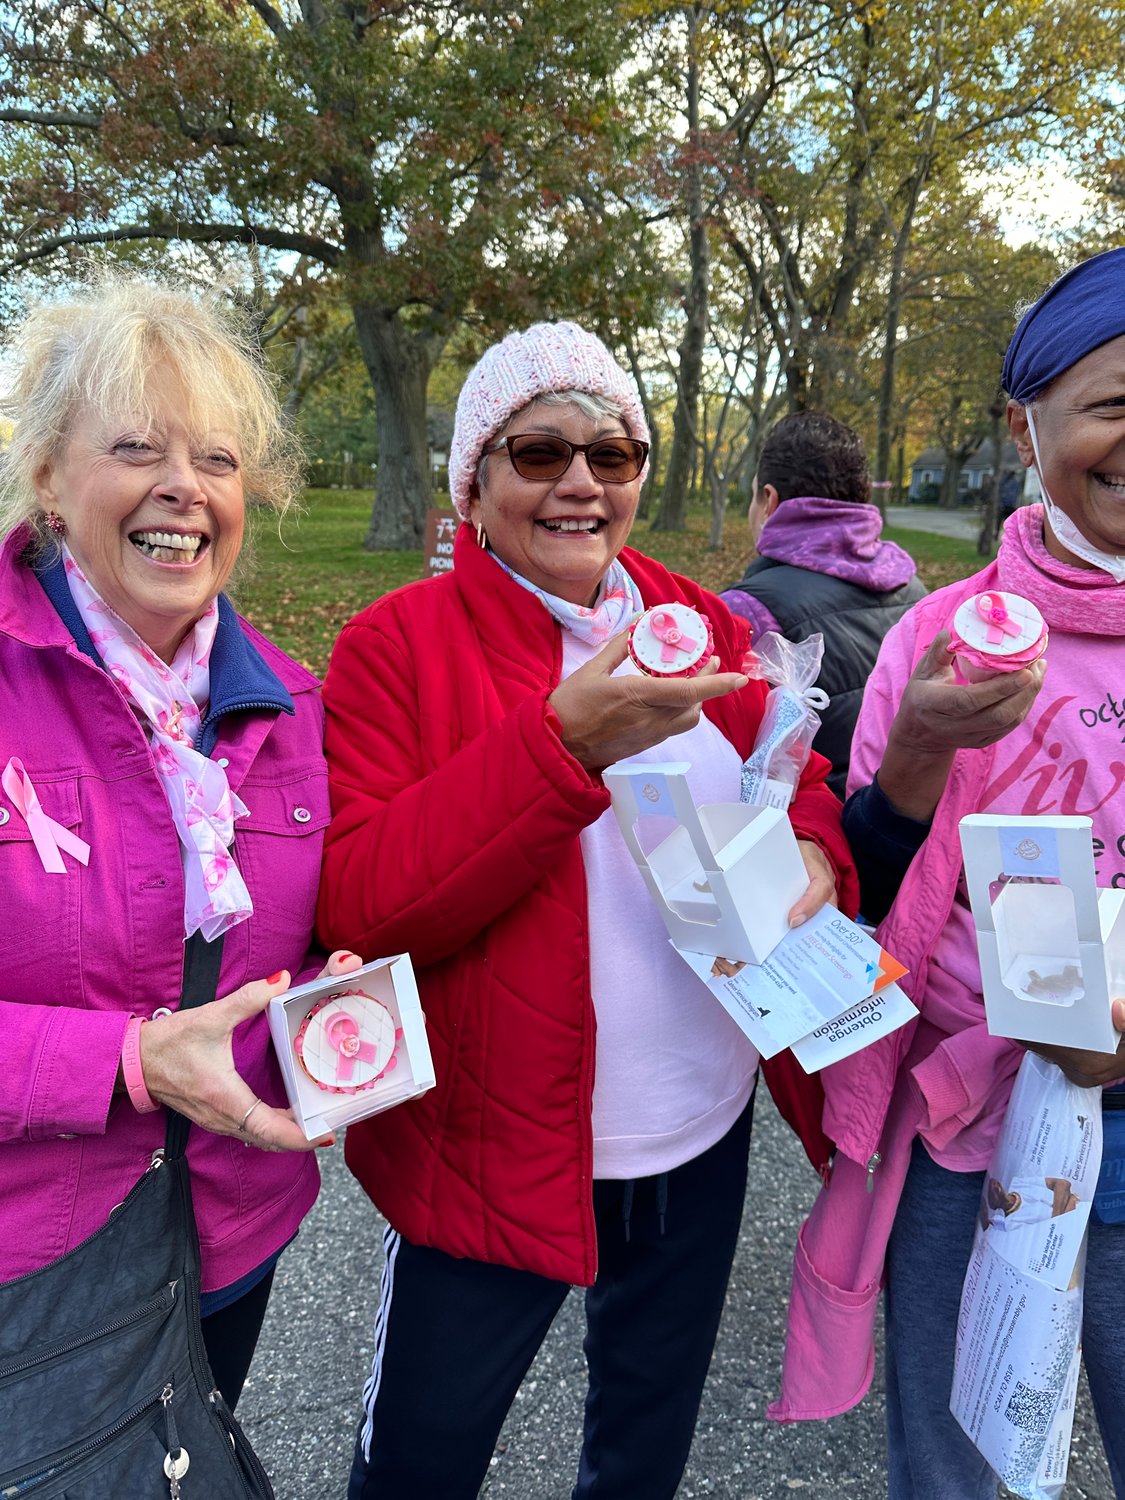 Attendees were all smiles with their custom breast cancer awareness- themed cupcakes.